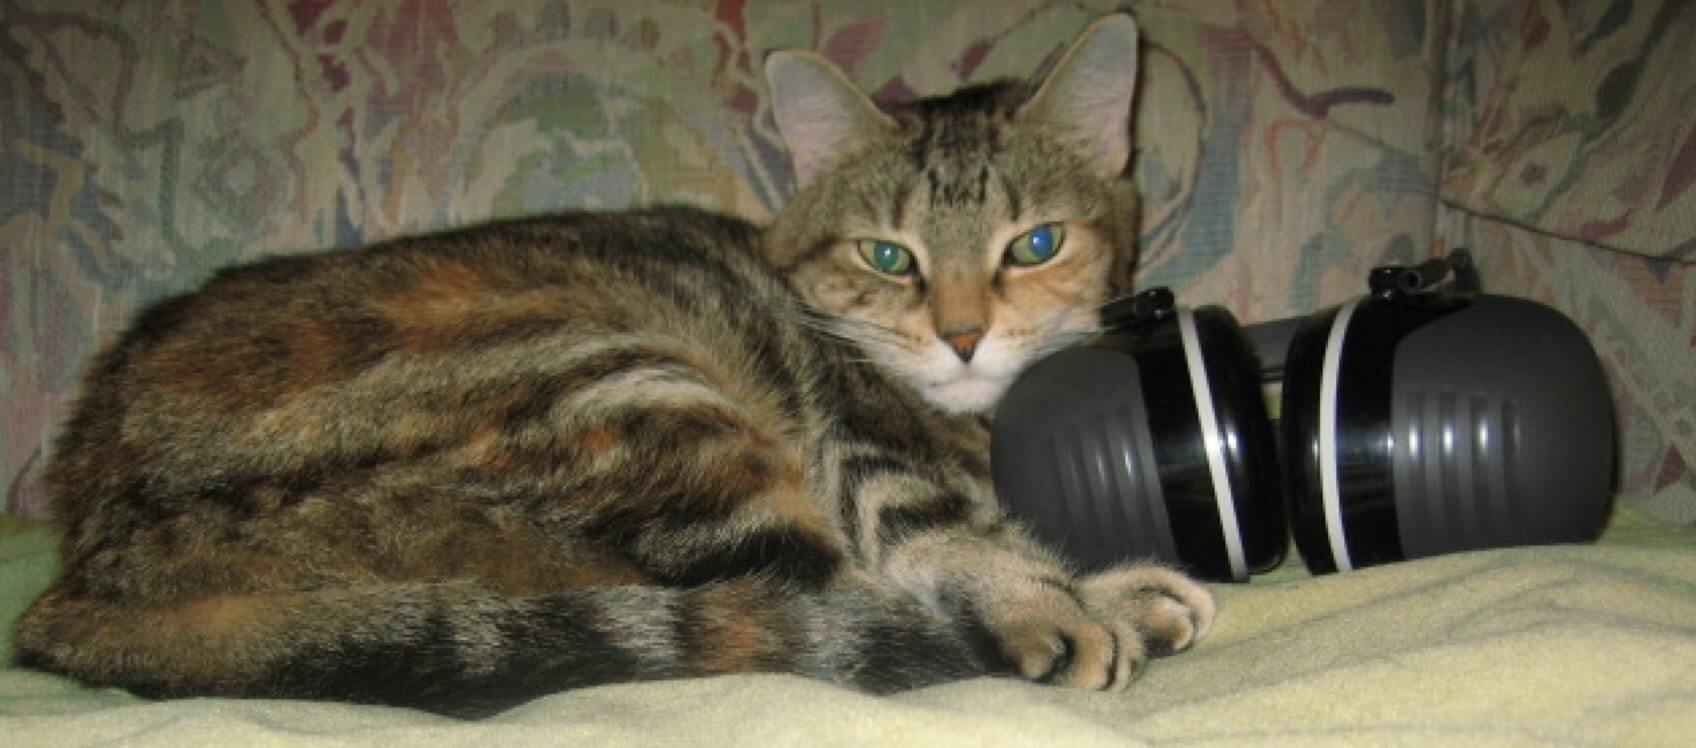 A cat rests on a pair of noise-protection ear muffs.